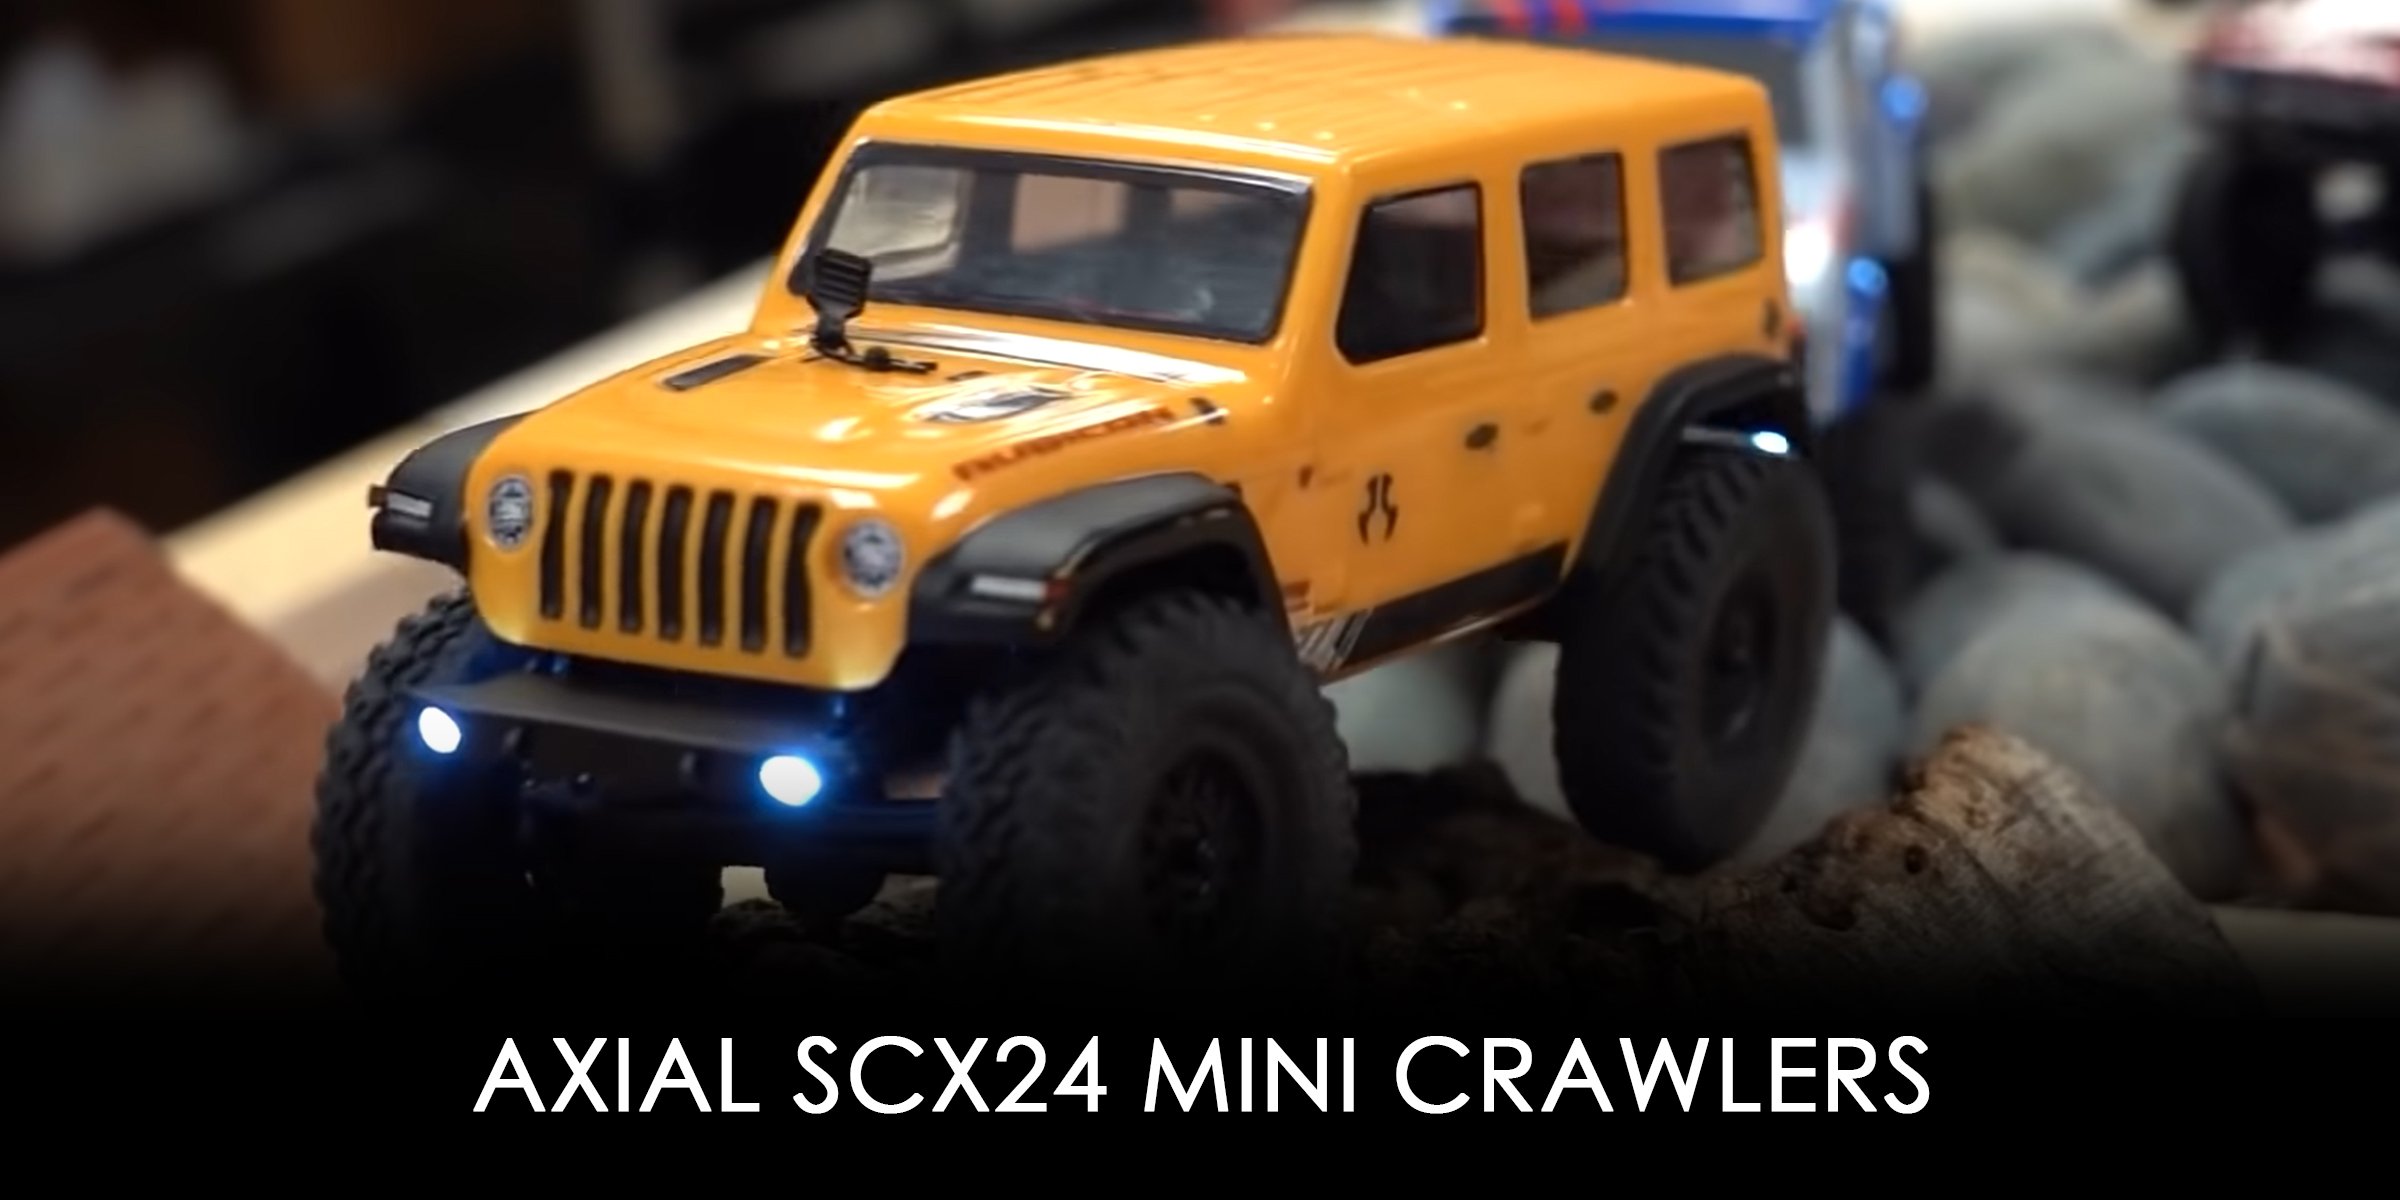 Top 10 Indoor RC Cars - #6 Axial SCX24 1:24 Scale Crawlers